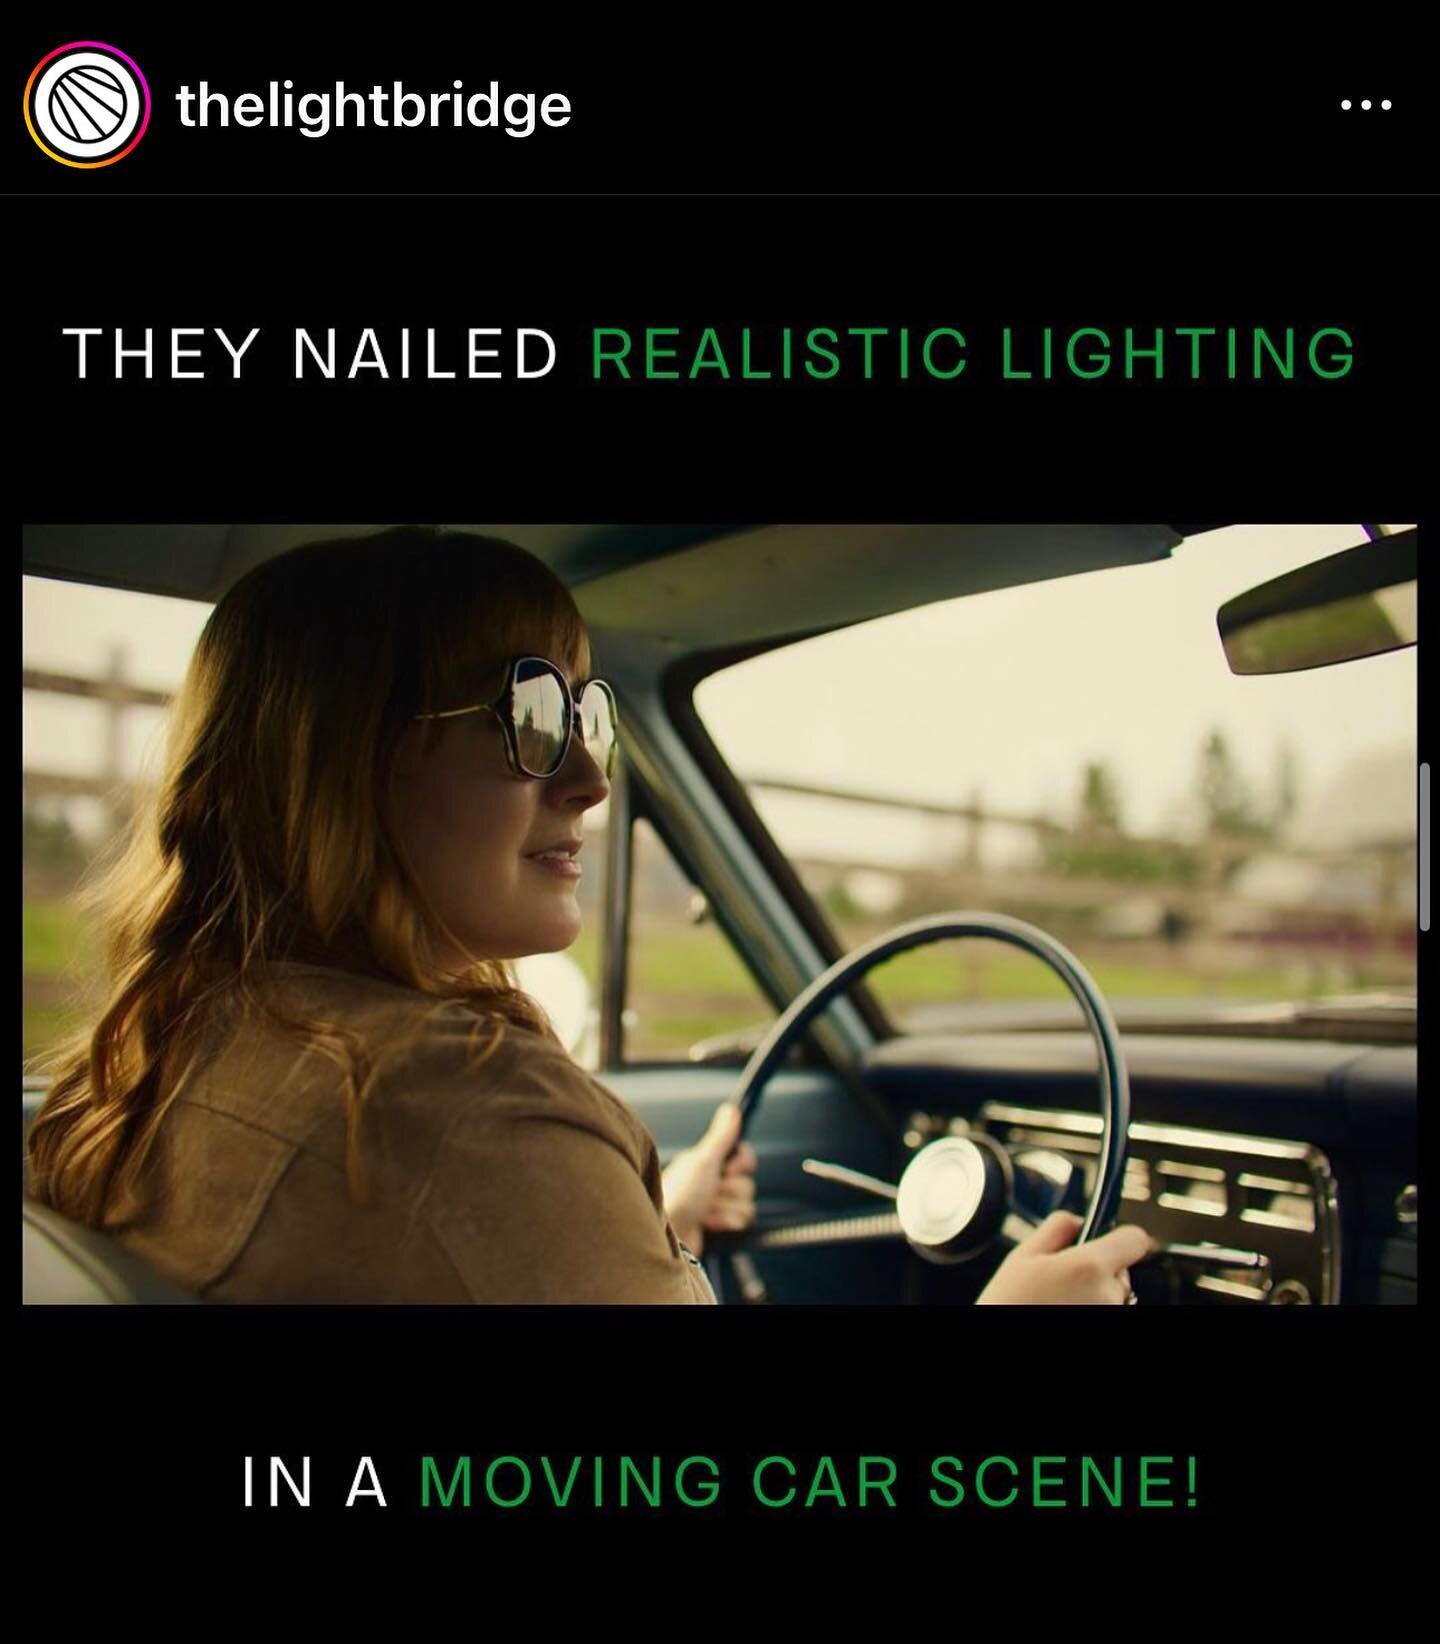 Proud to have our work featured on The Light Bridge&rsquo;s account. I had met @ballingerjakob at @camerimage.festival in 2019 and he demoed the CRLS for me. I&rsquo;ve been taken by them ever since.
I&rsquo;m grateful to have been asked to DP @outof